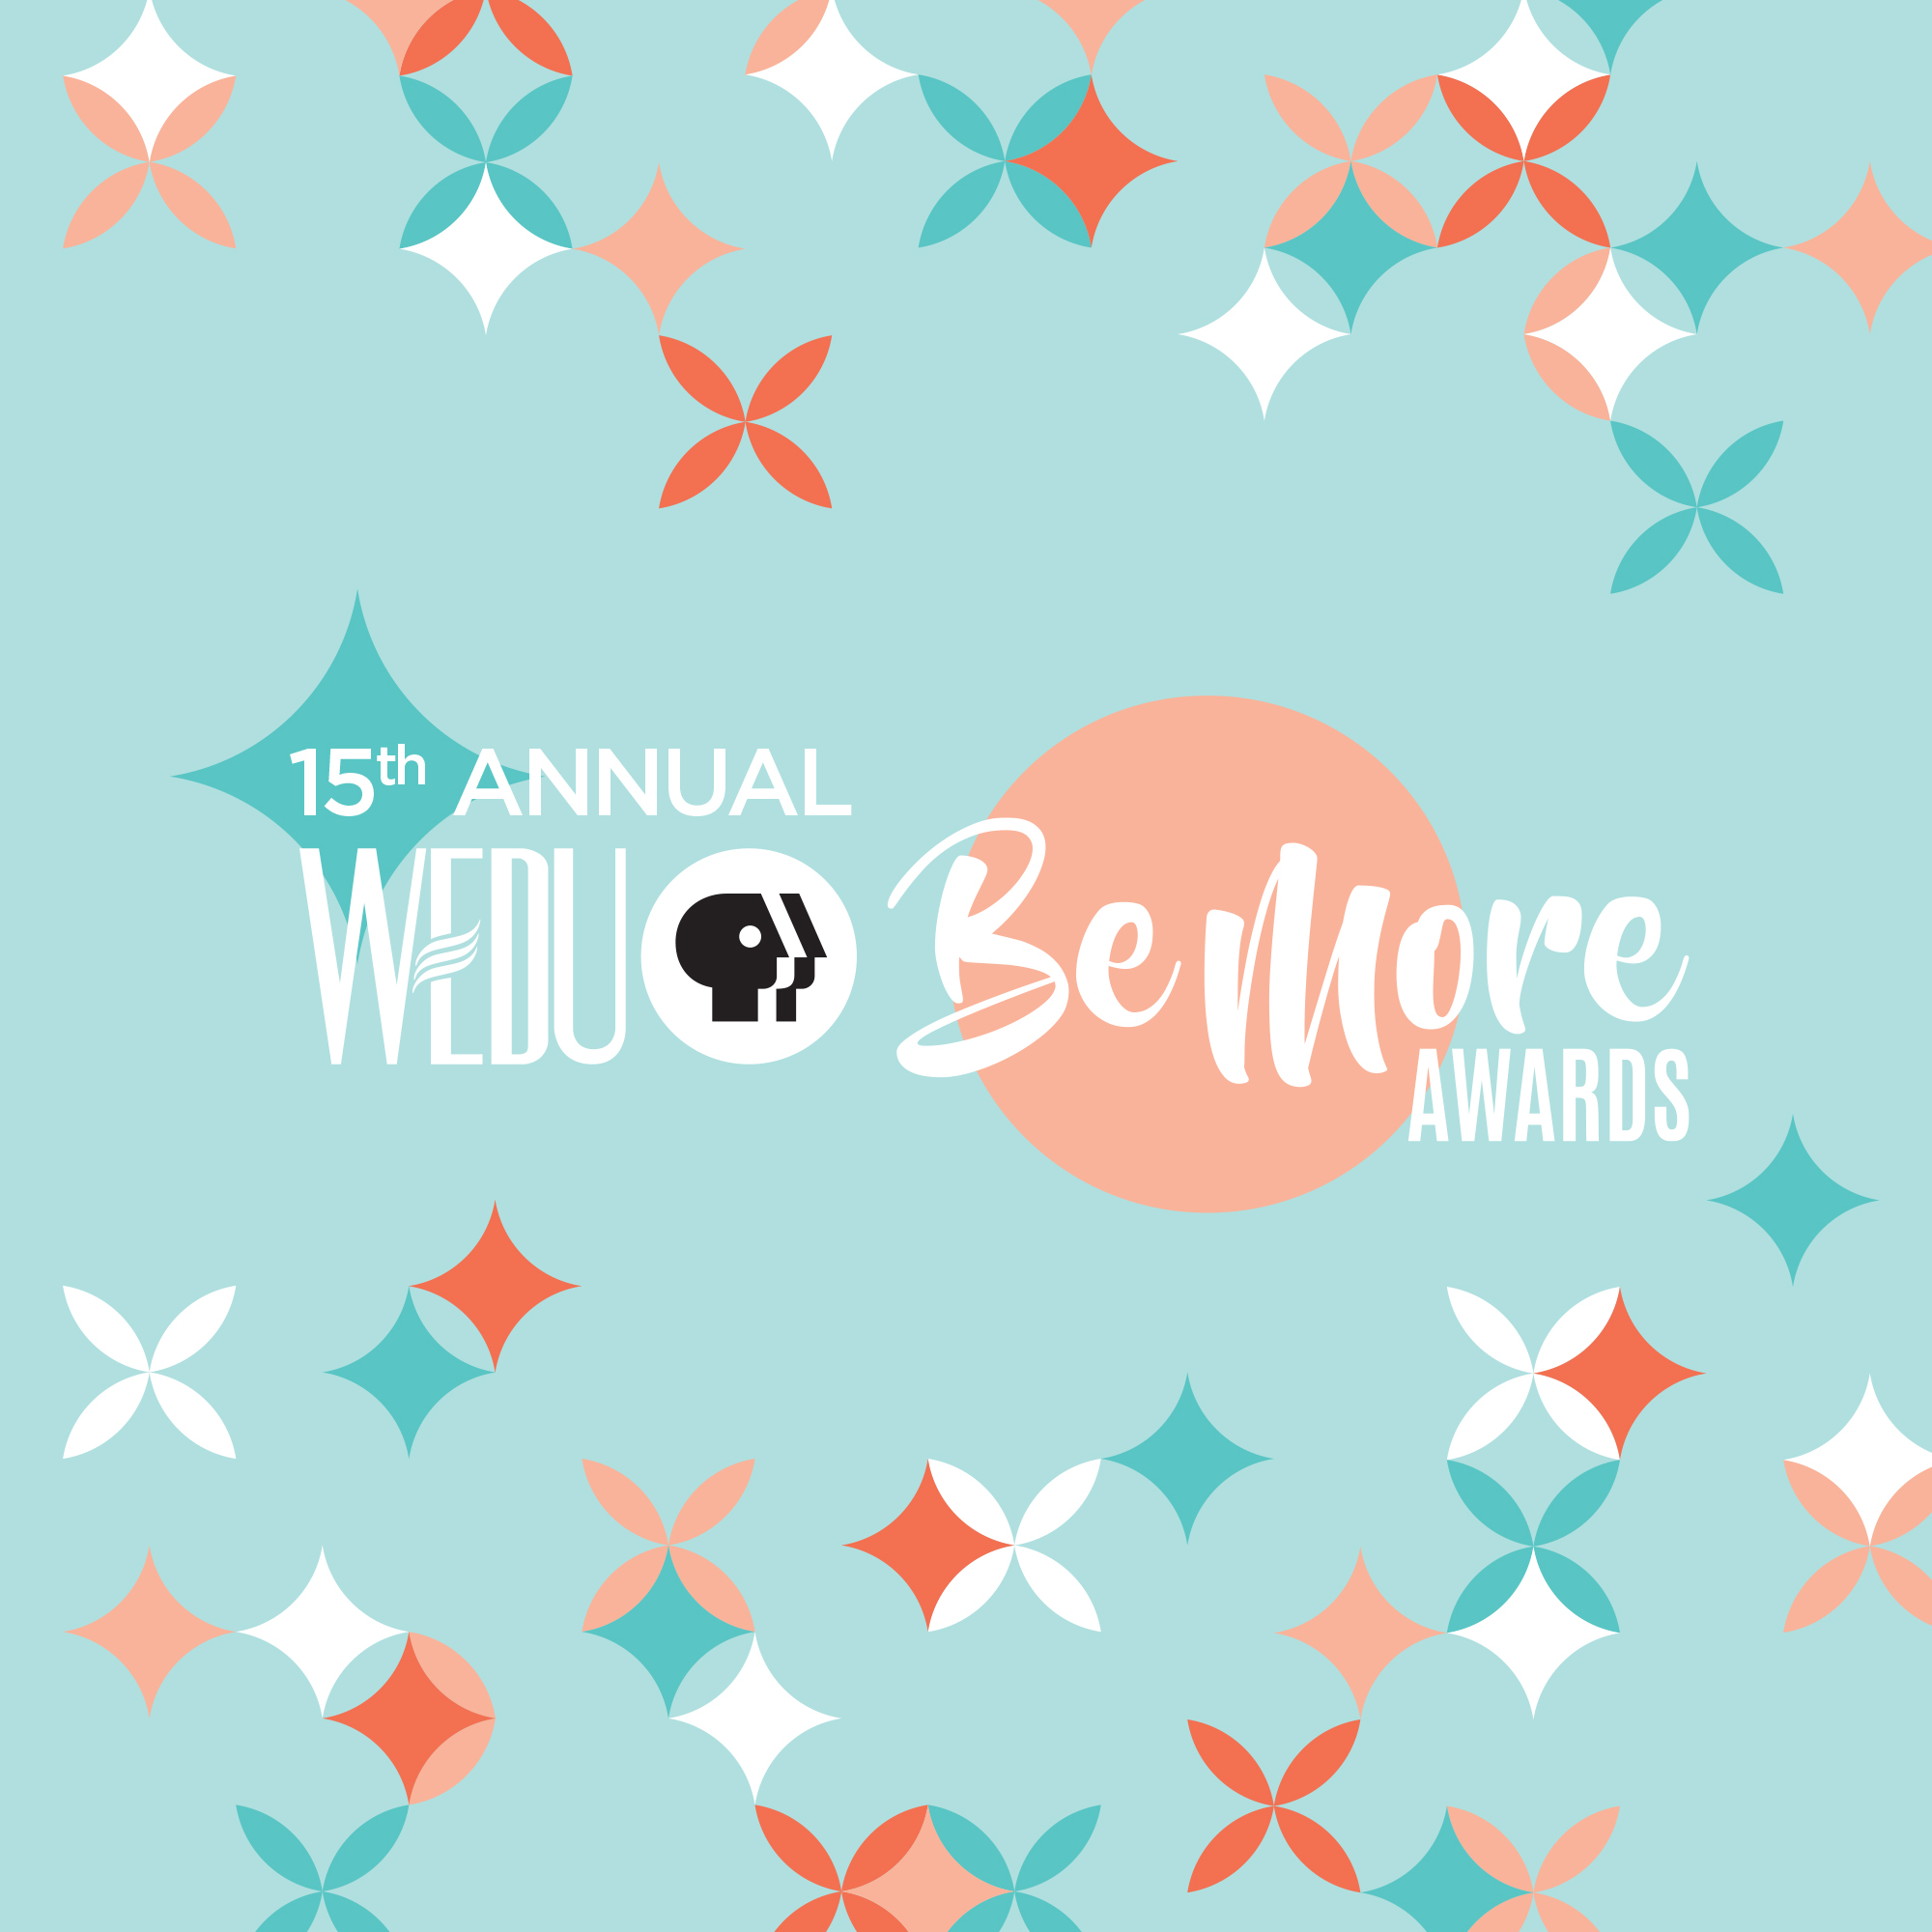 15th Annual Be More Awards